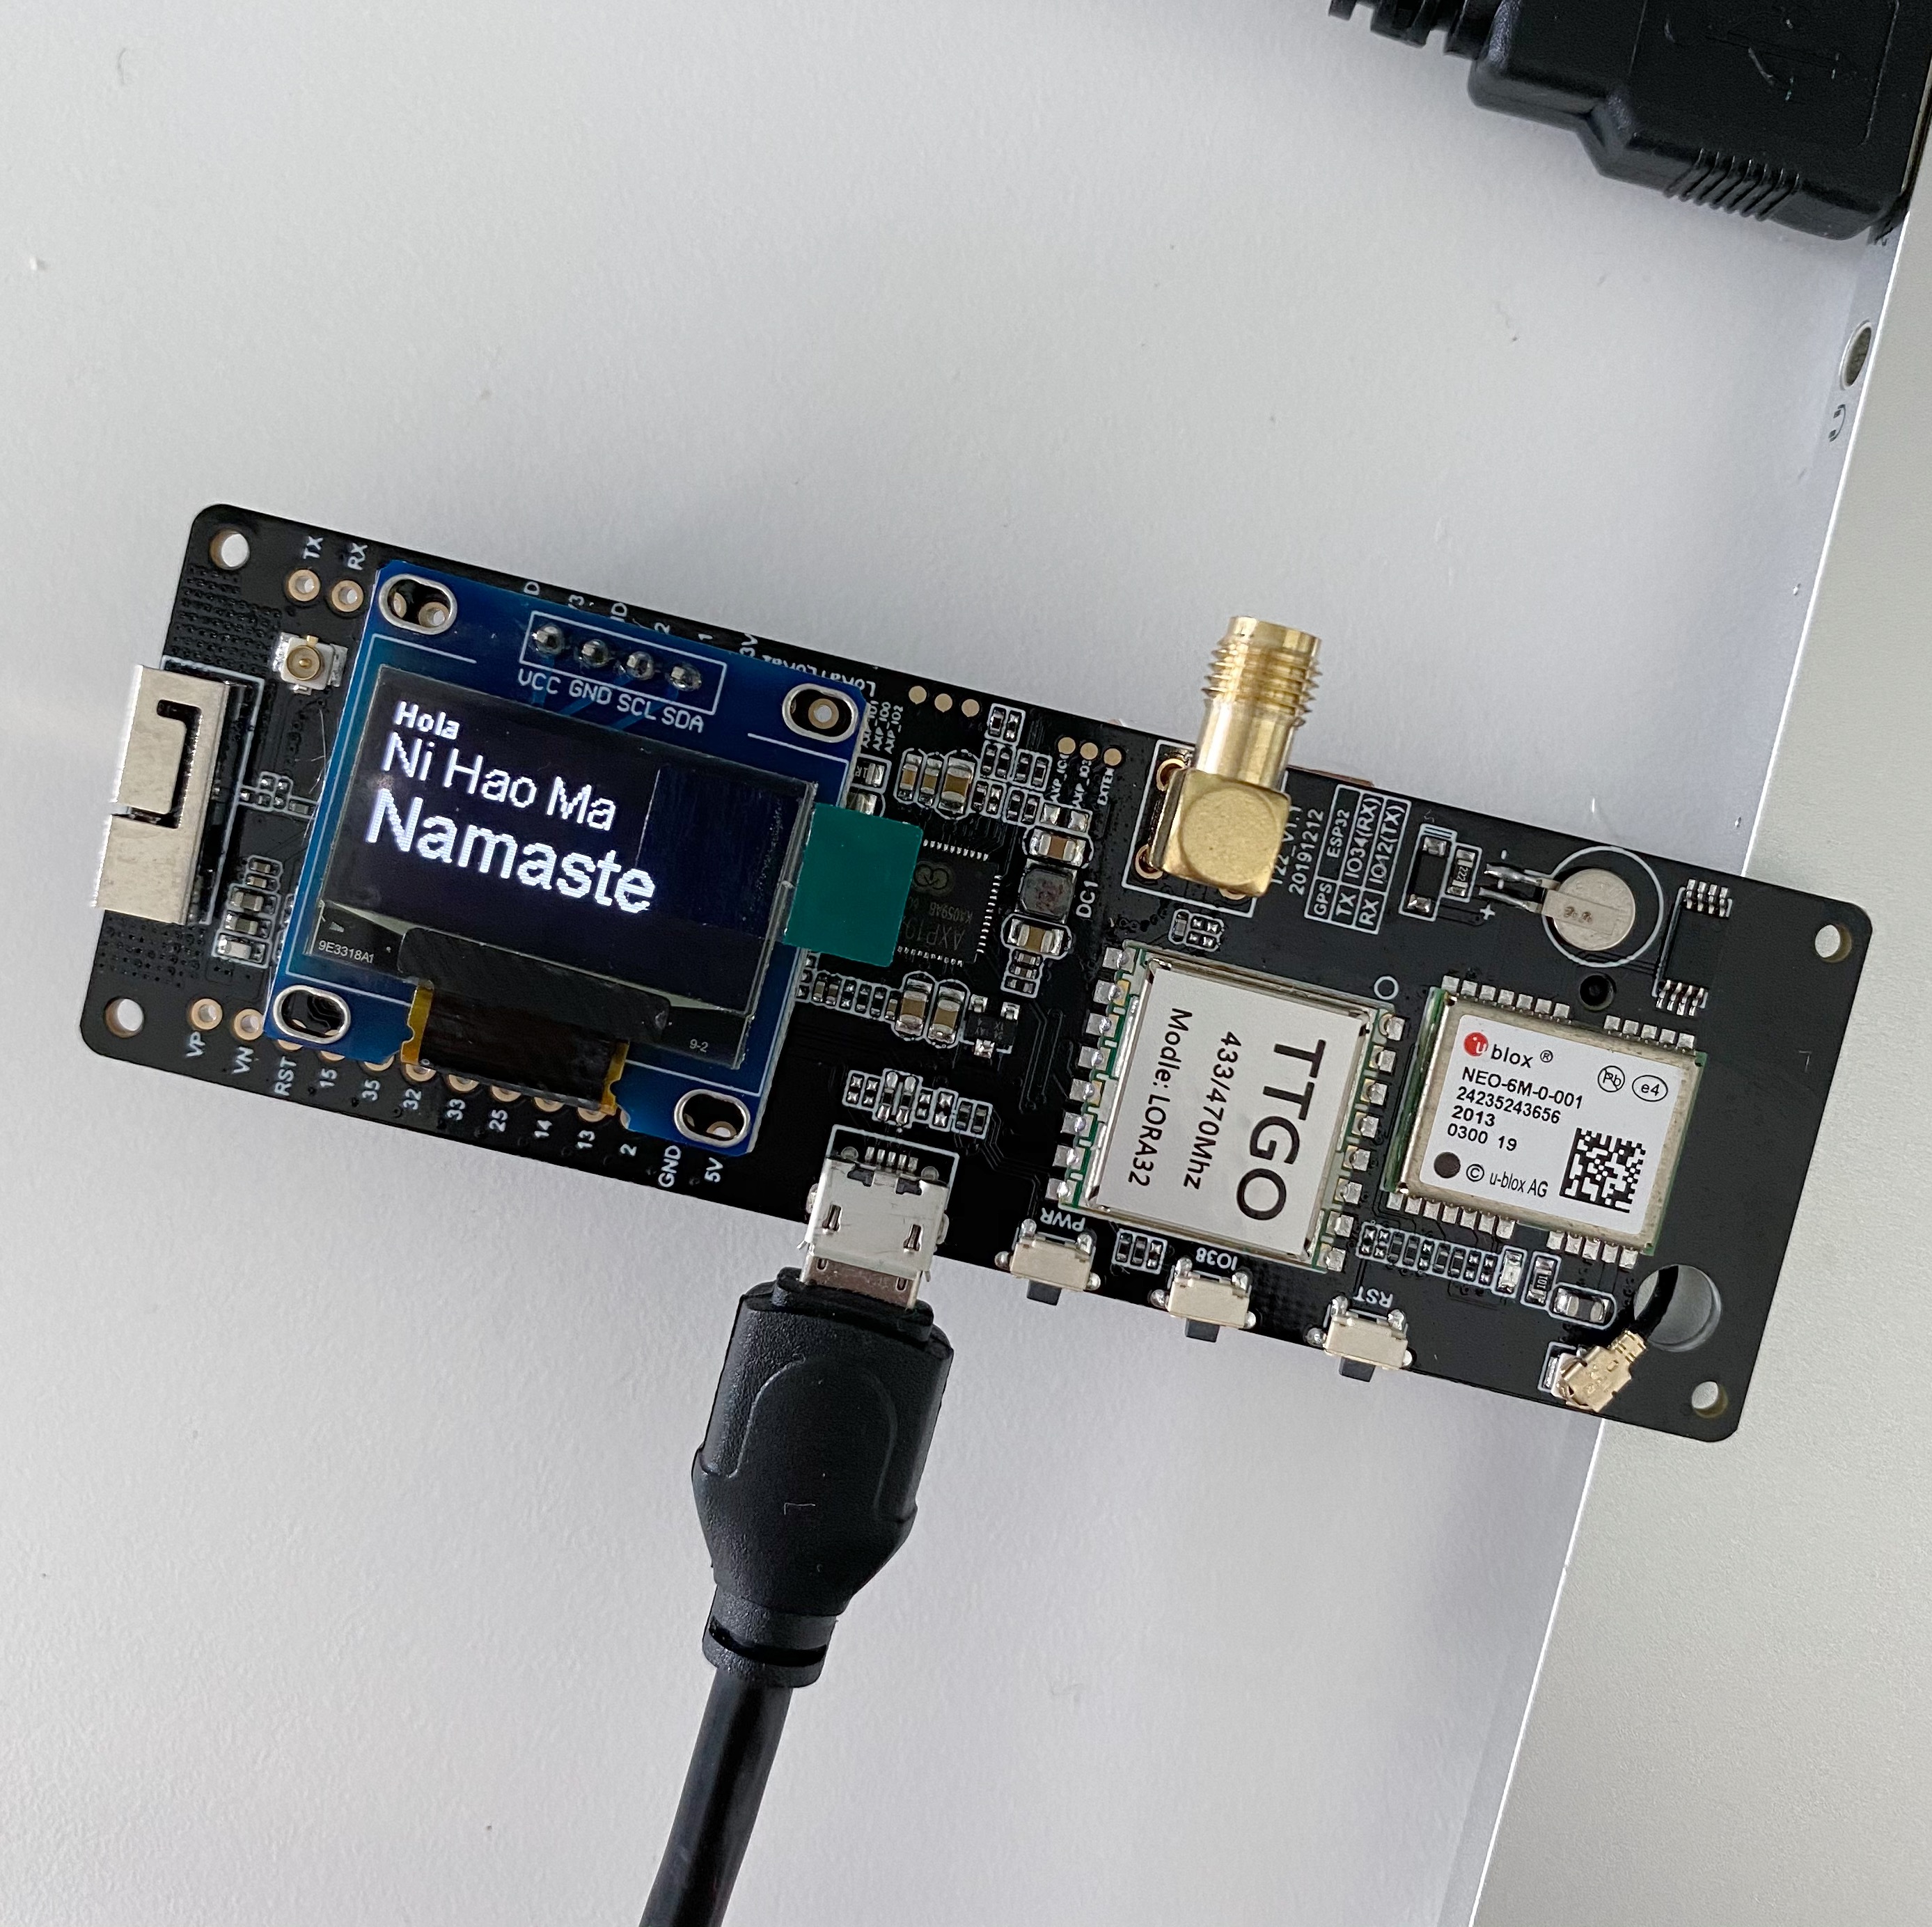 Display OLED SSD1306 with LilyGO T-Beam prototype